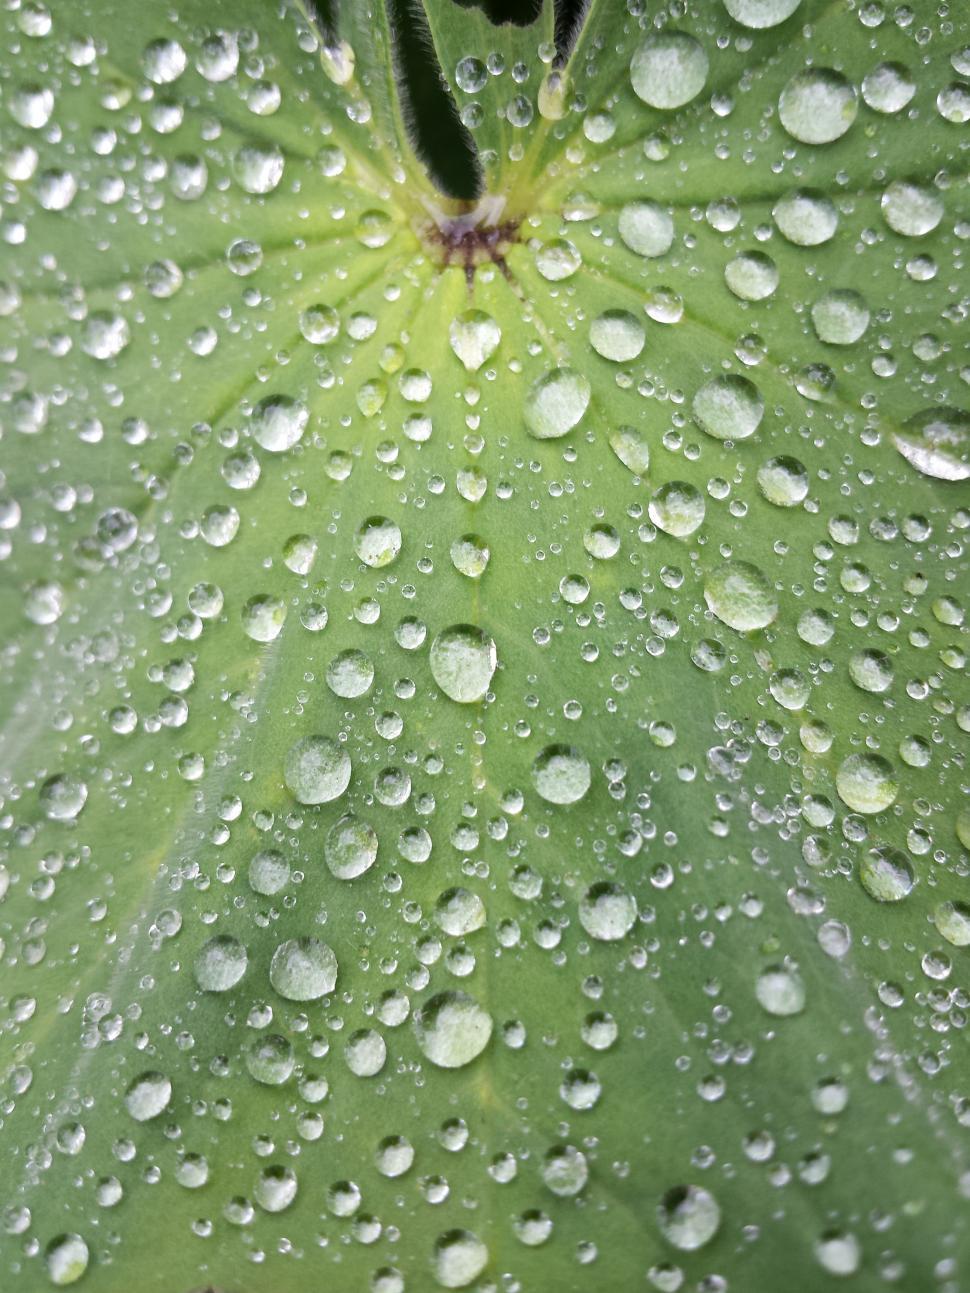 Free Image of Green Leaf With Water Droplets 